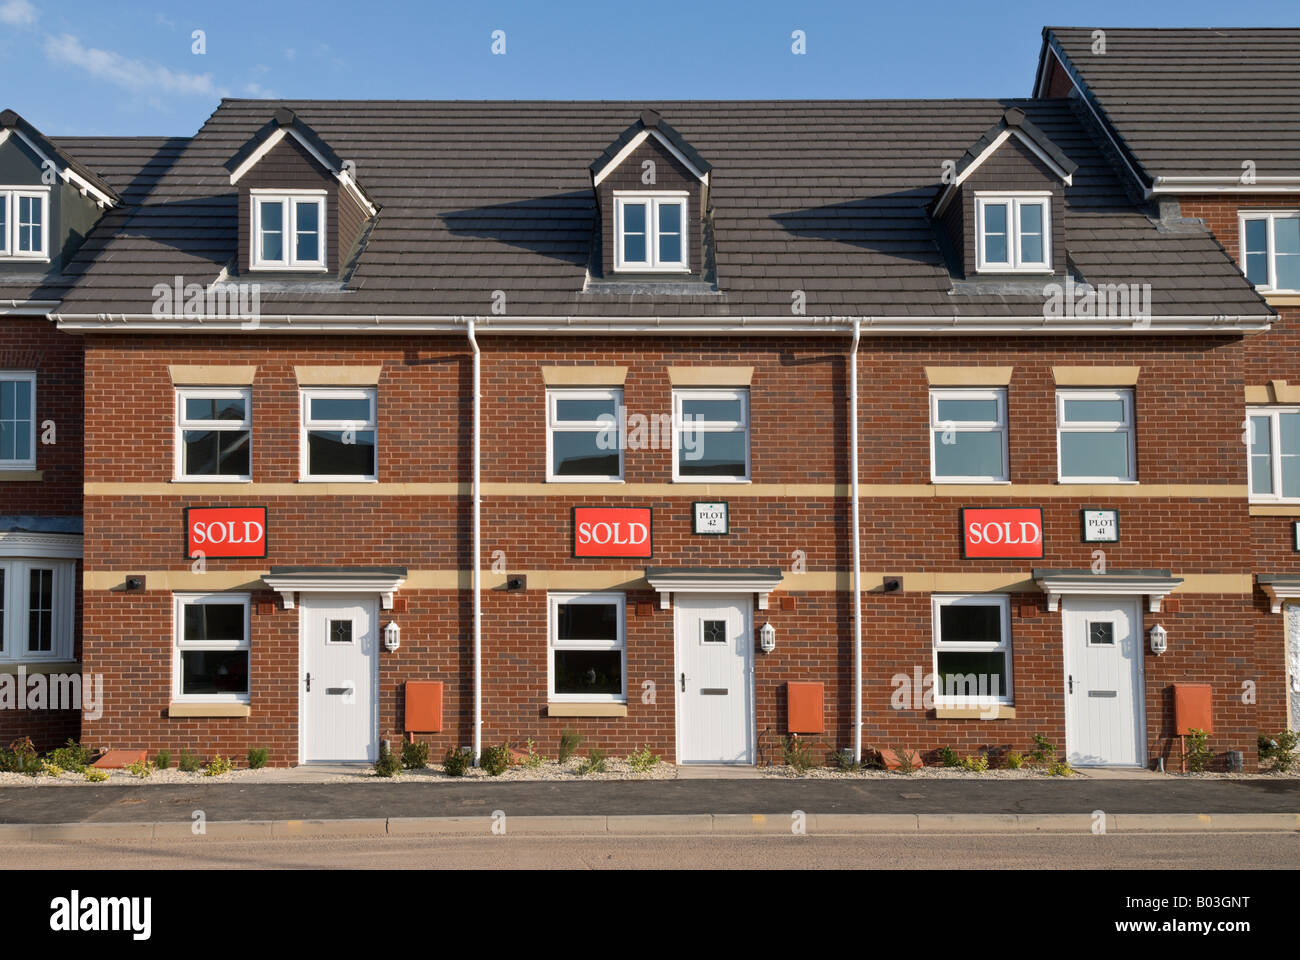 A row of new houses in the UK each with SOLD written on them. Stock Photo